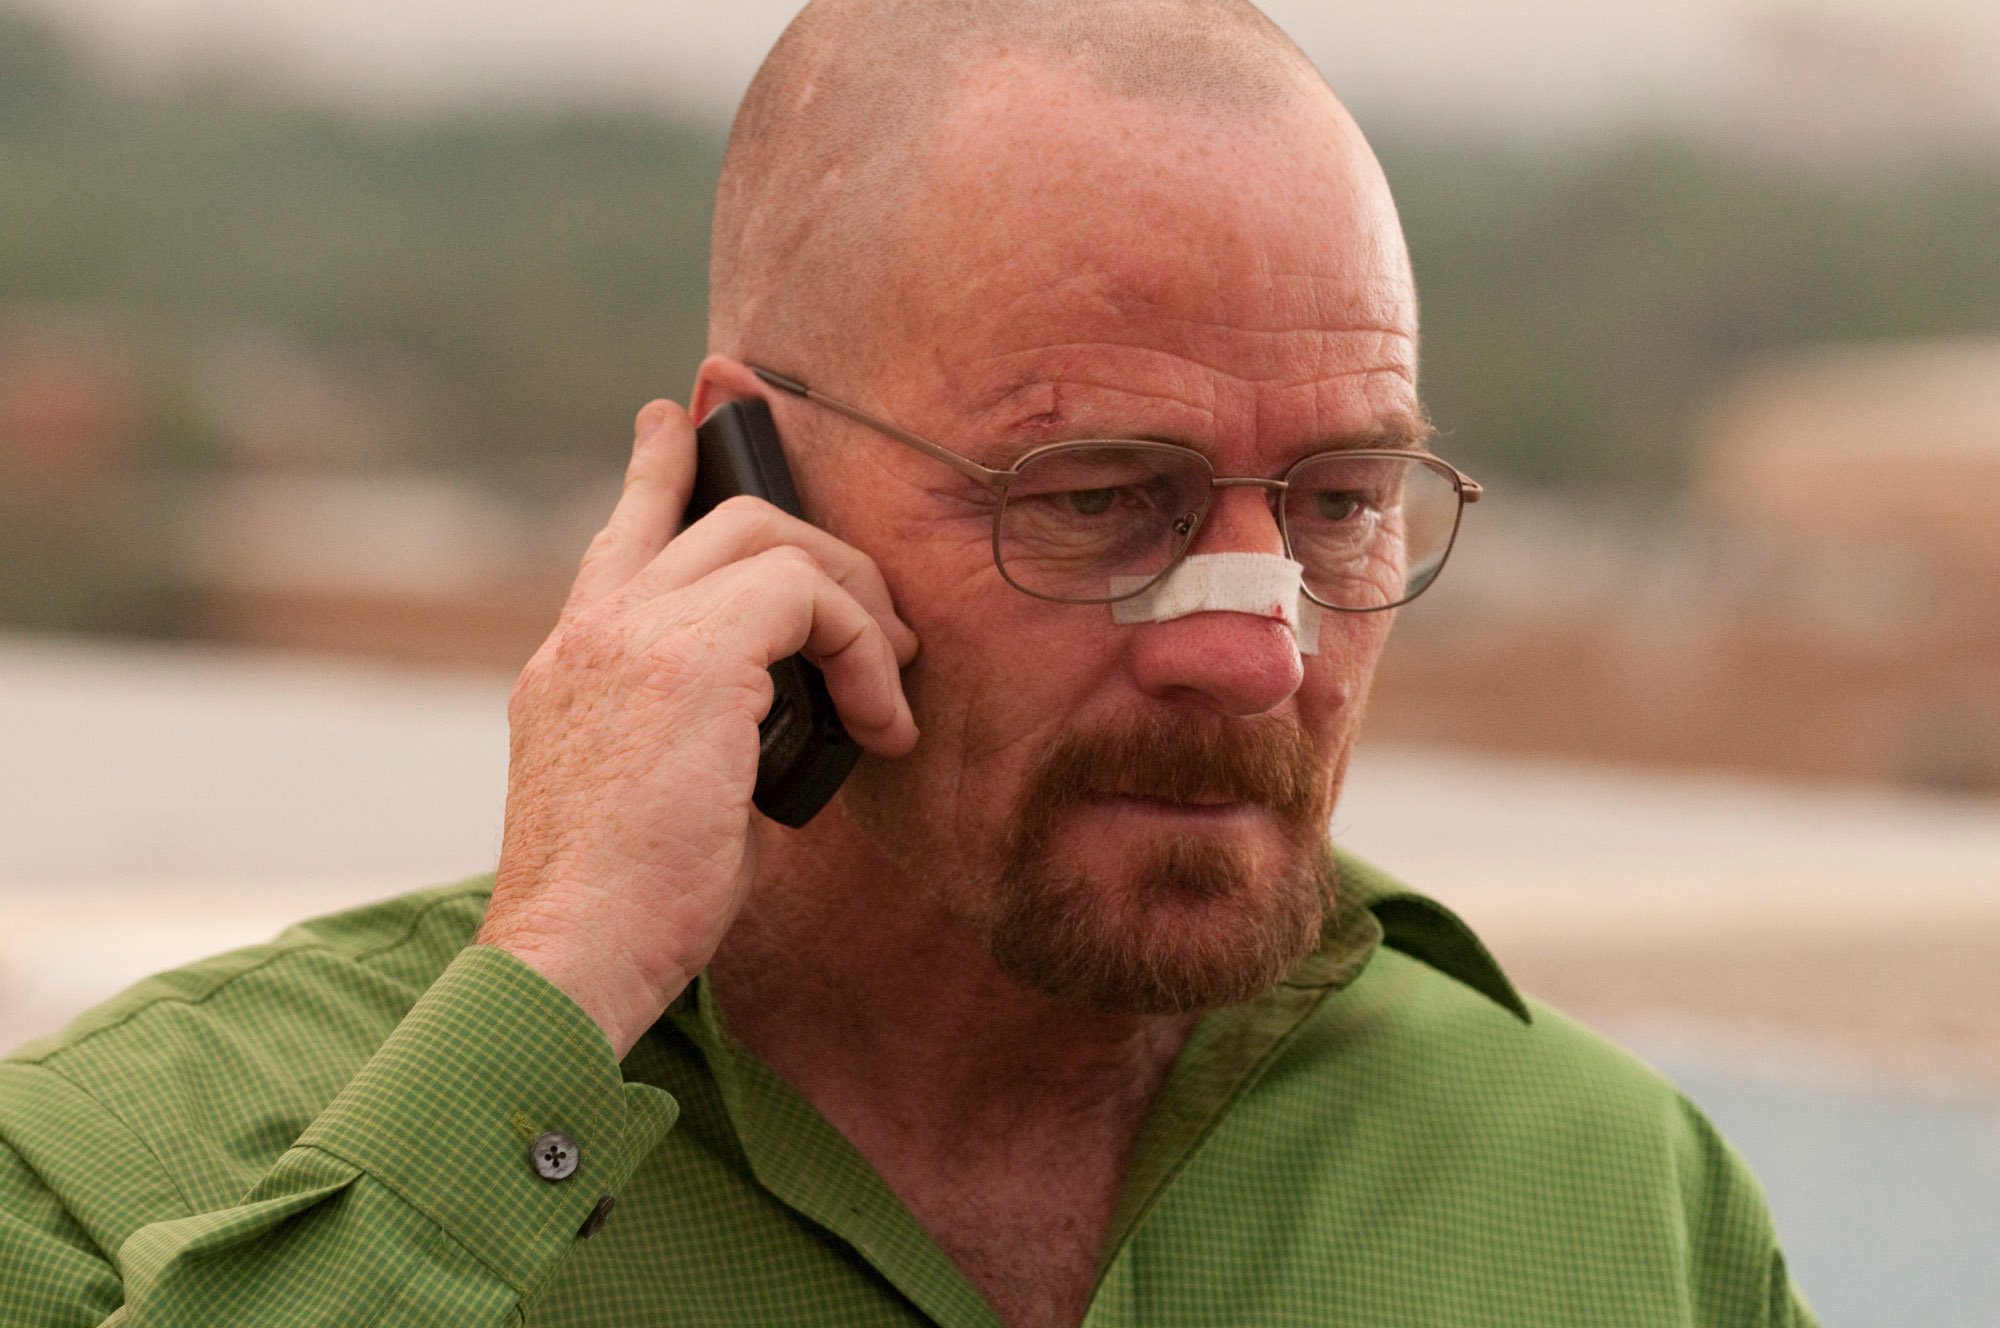 Breaking Bad': The Best and Worst Episodes of Season 4, According to IMDb